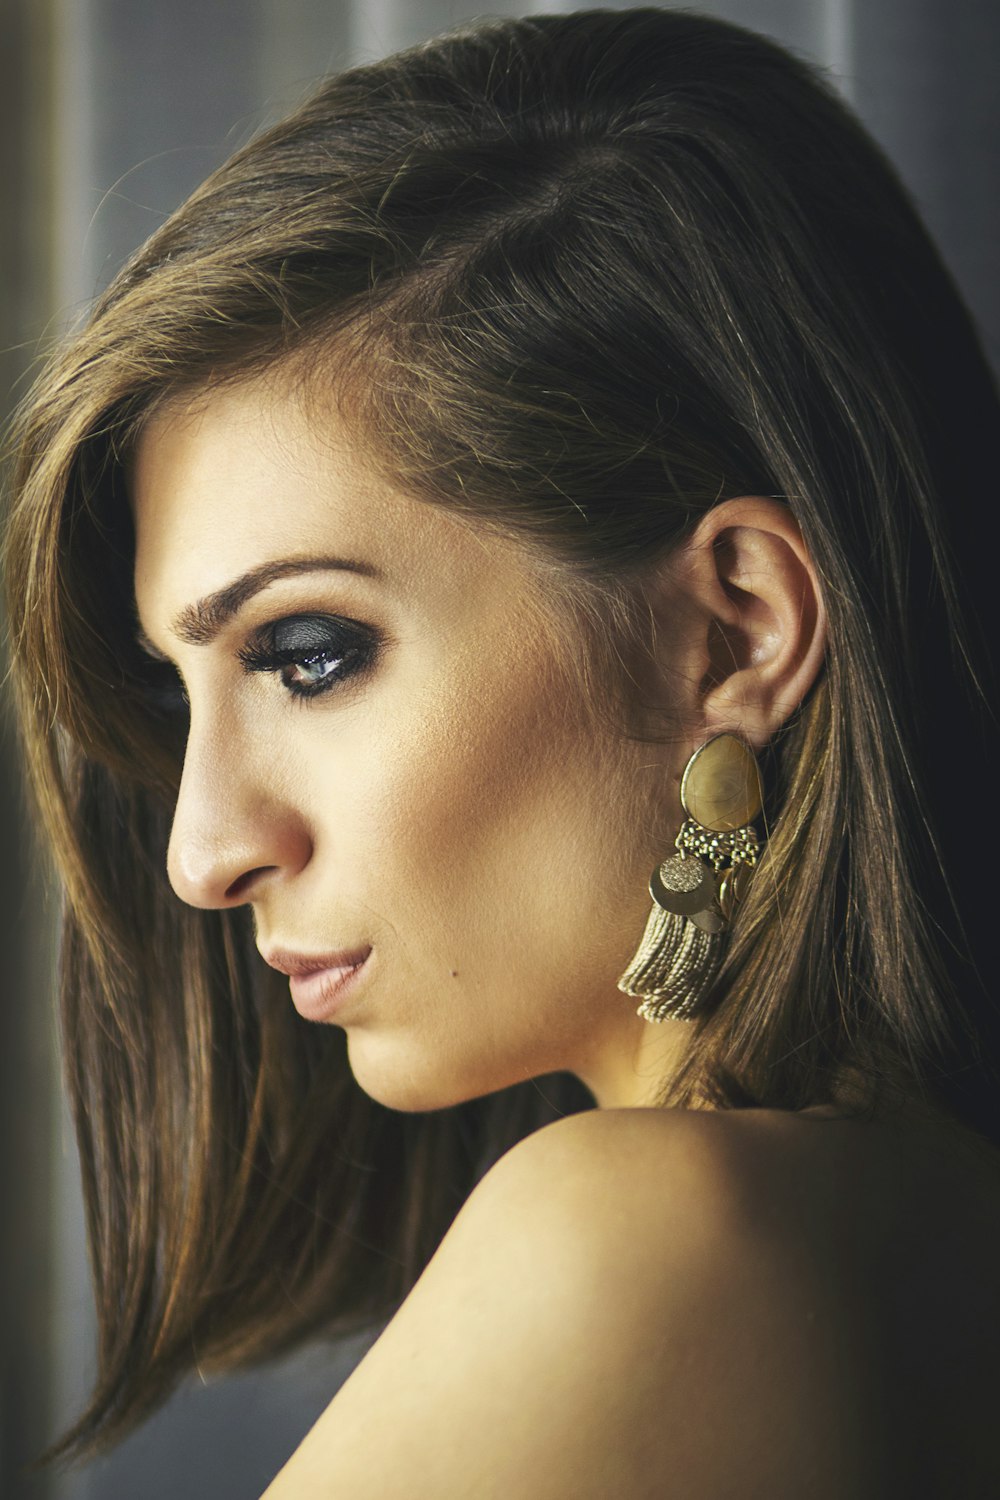 woman with gold and diamond stud earring